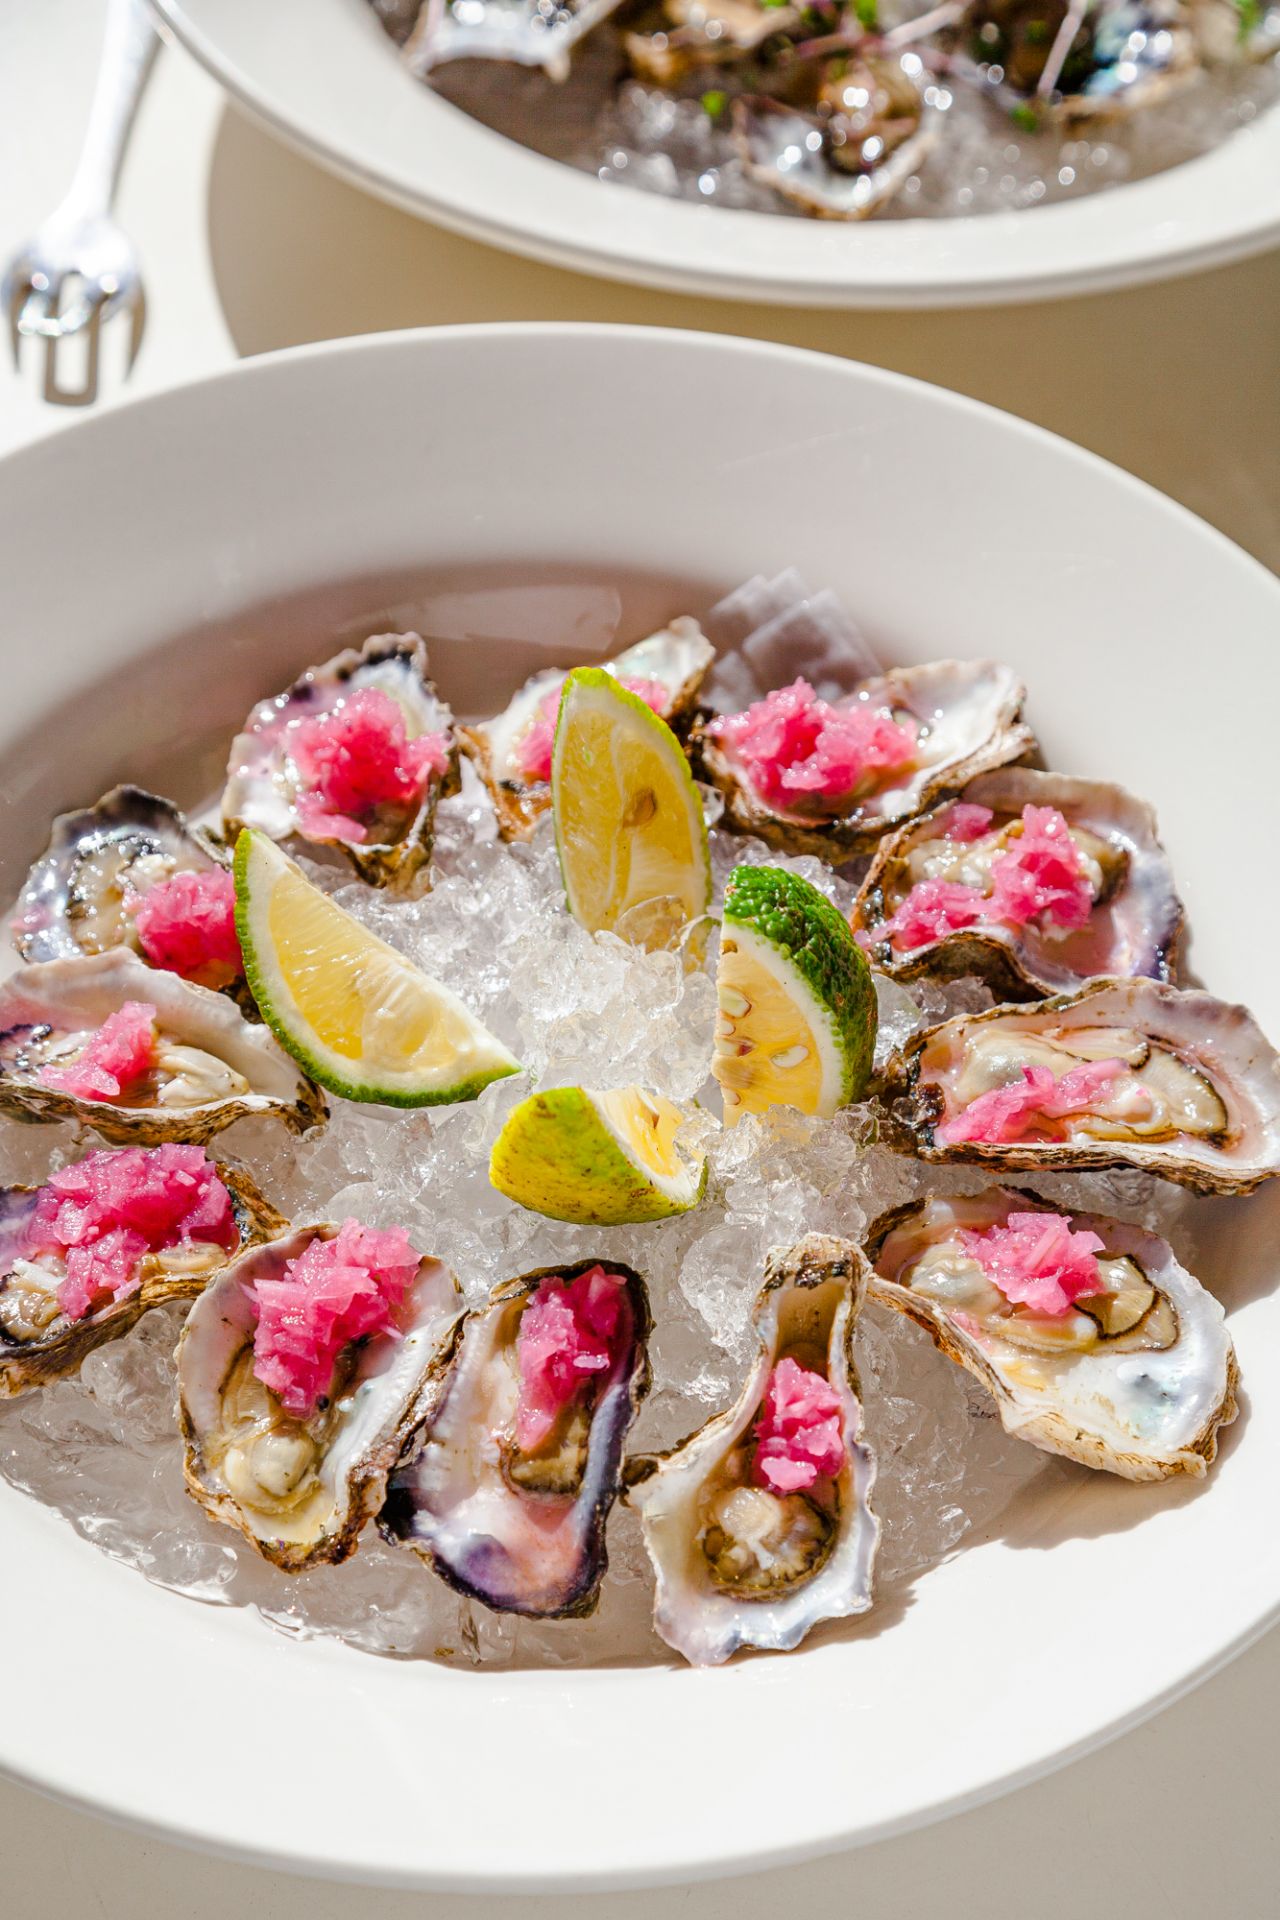 Oysters & More at Village - Seafood Restaurant